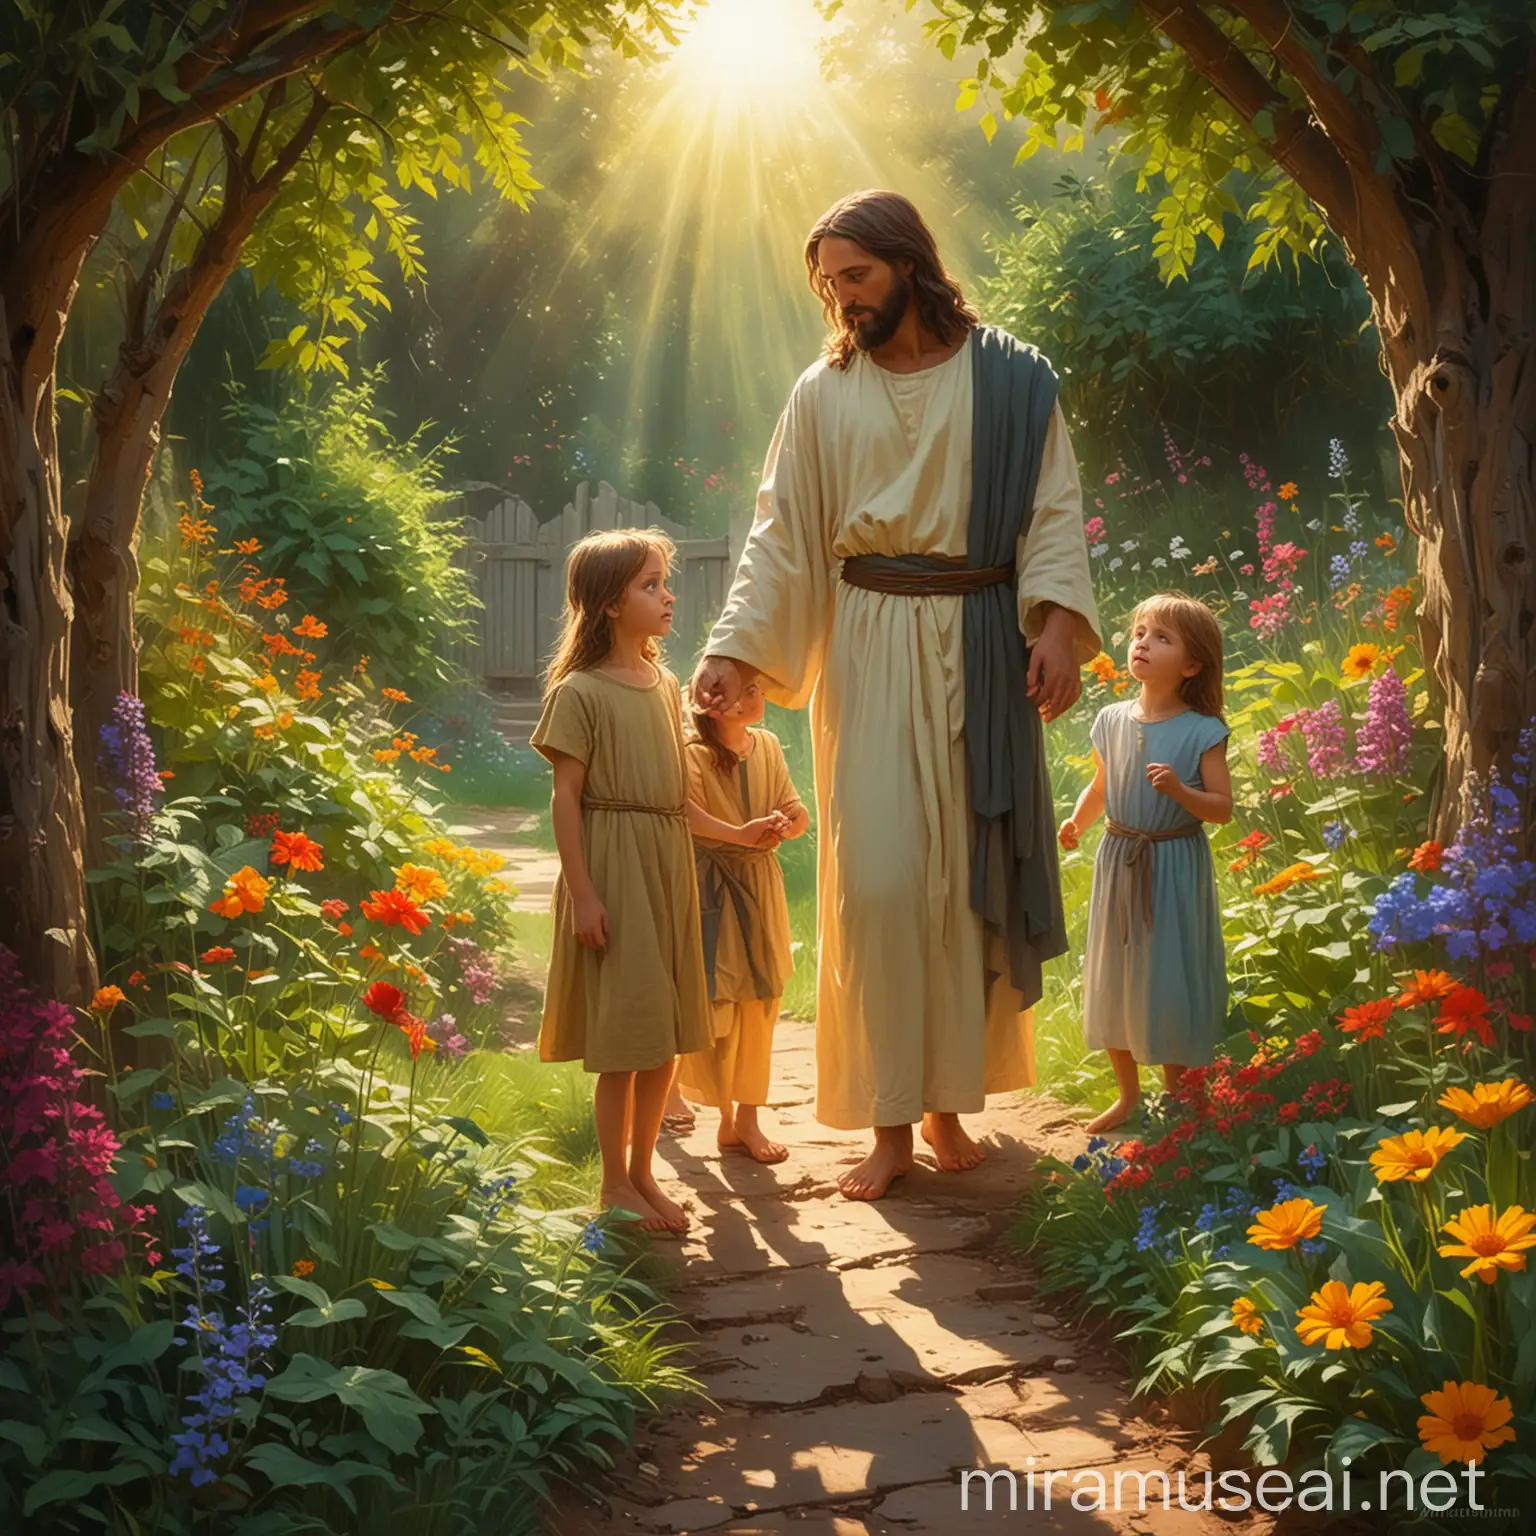 Vibrant Realistic Illustration of Jesus Christ with Children in a Sunlit Garden